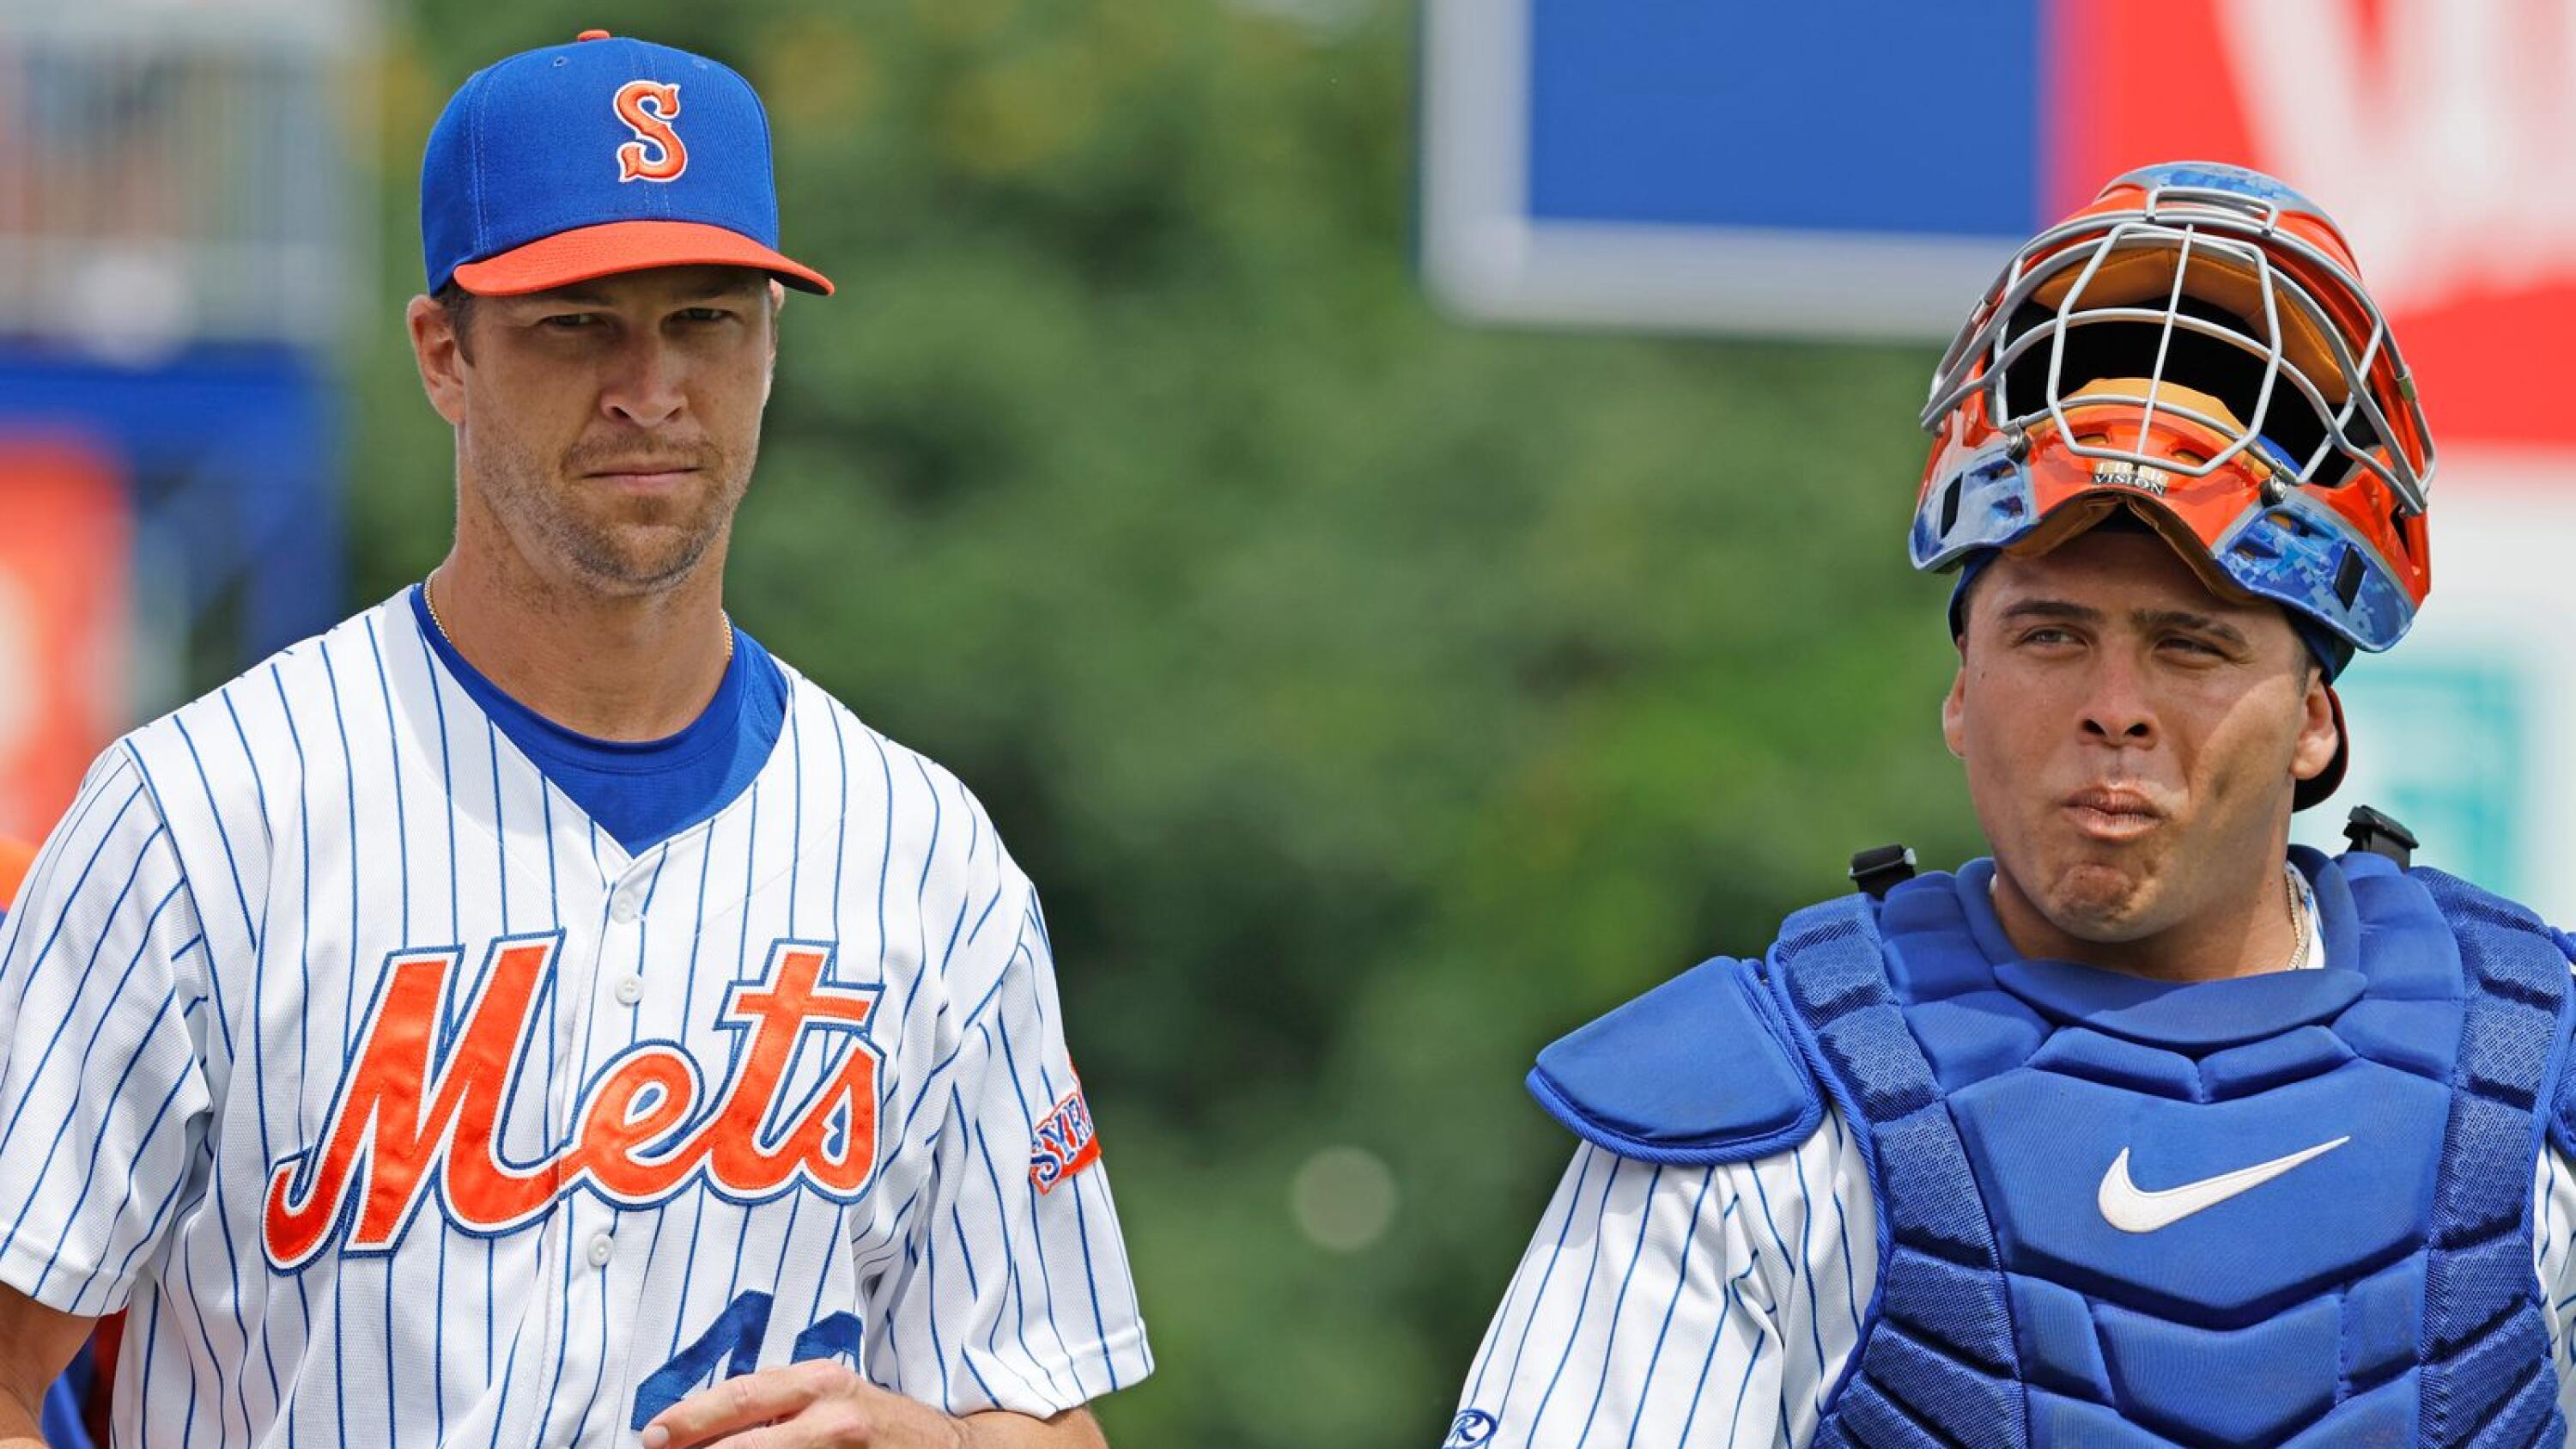 Jacob deGrom has sore shoulder; simulated game delayed